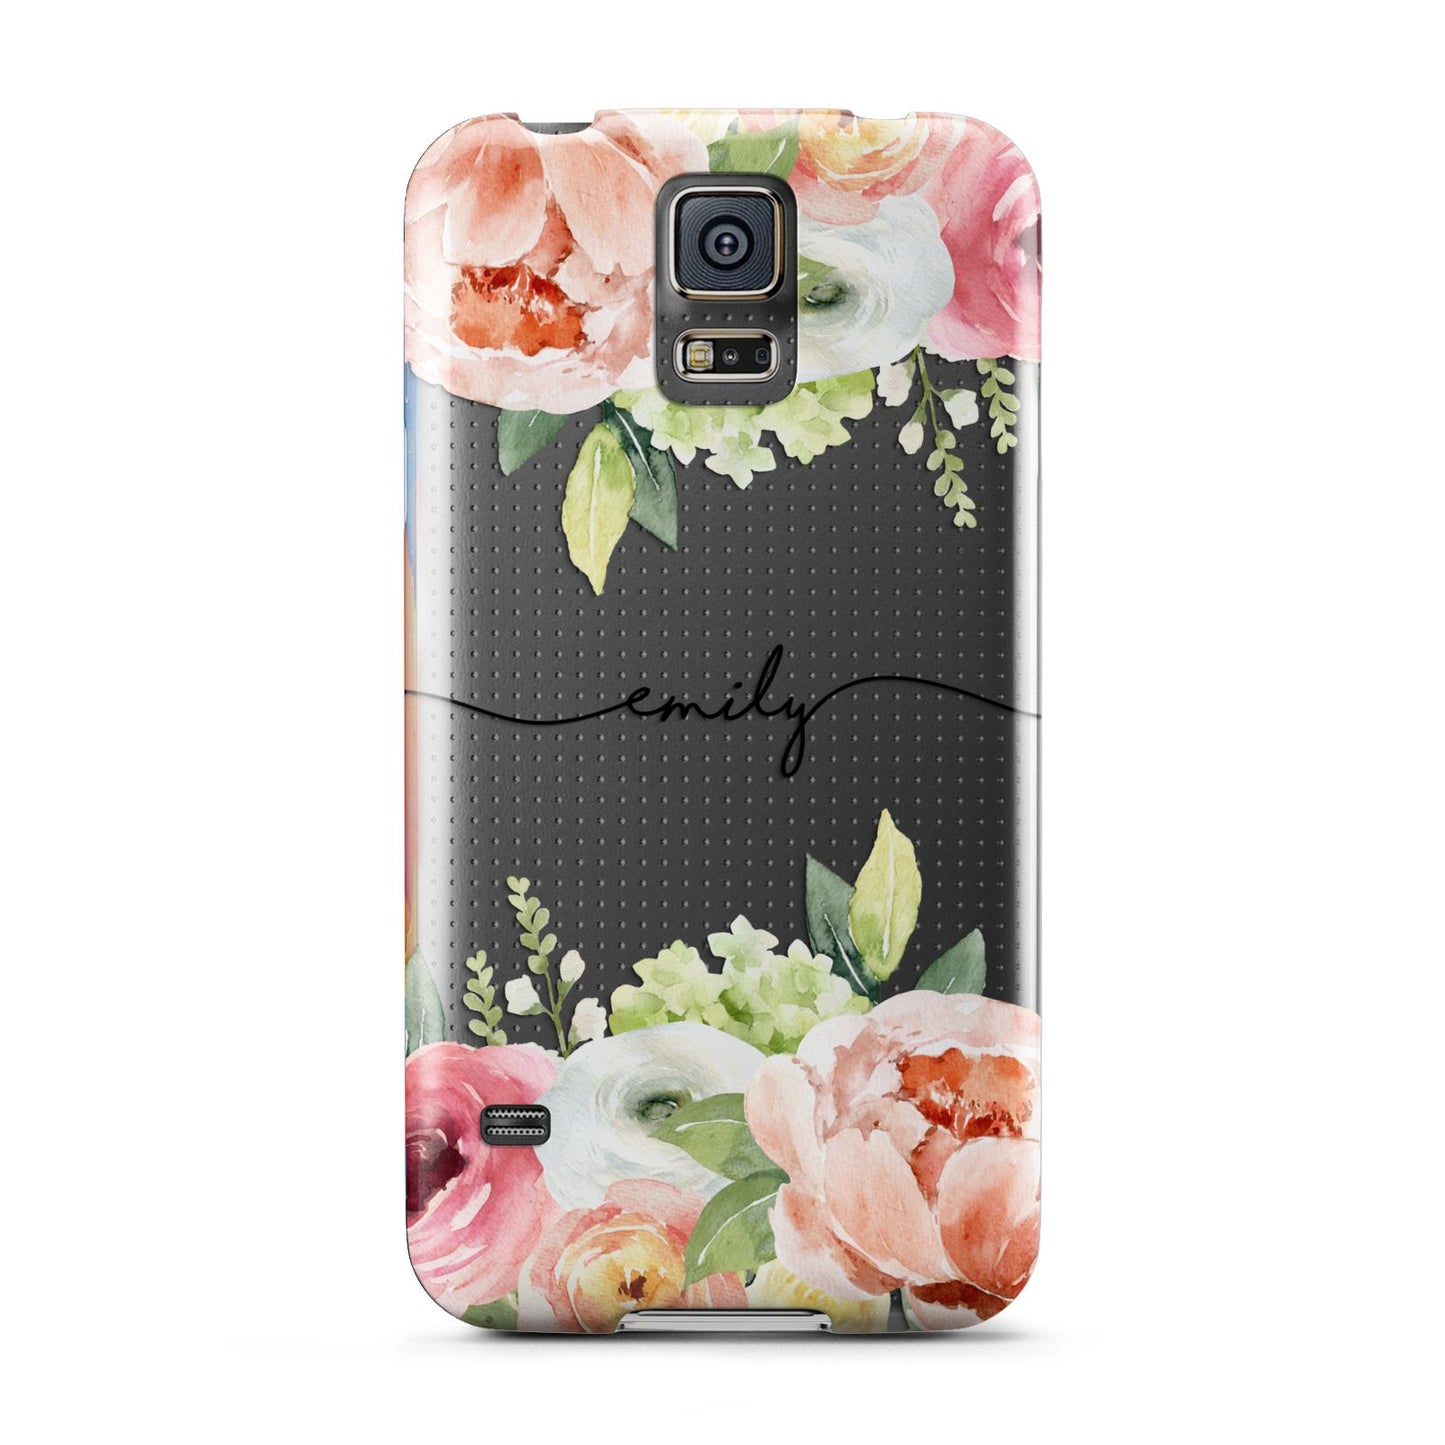 Personalised Flowers Samsung Galaxy S5 Case